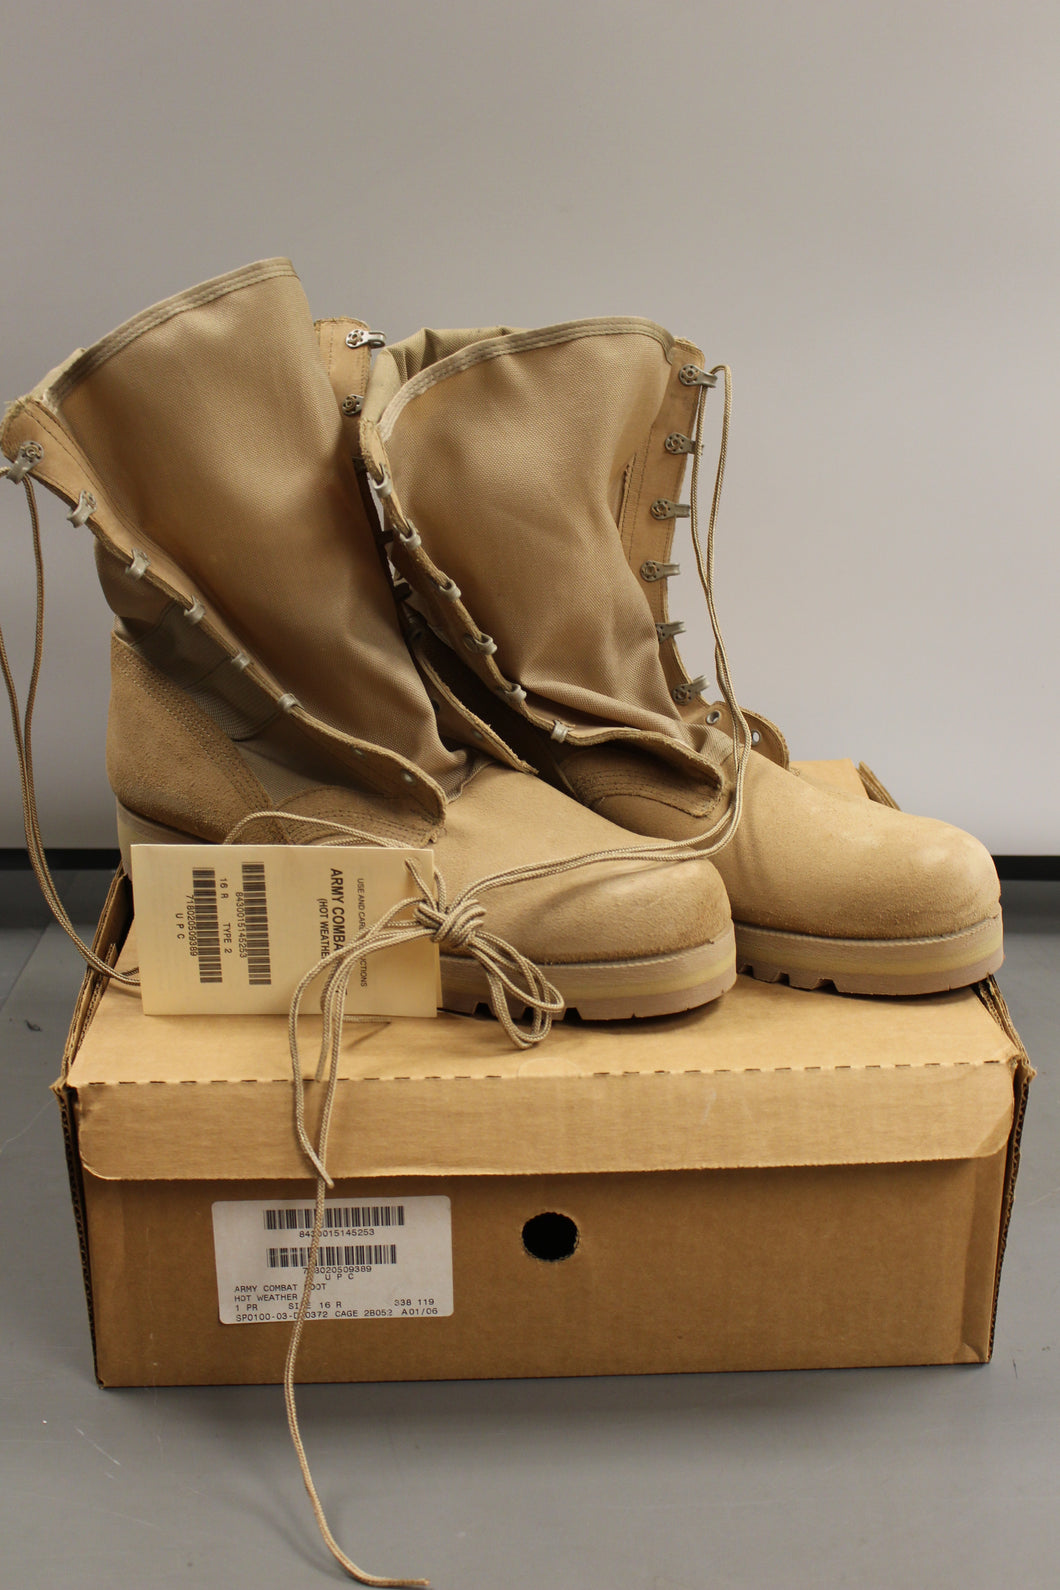 US Military Issued Tan Combat Boots, Size: 16R, 8430-01-514-5253, New!